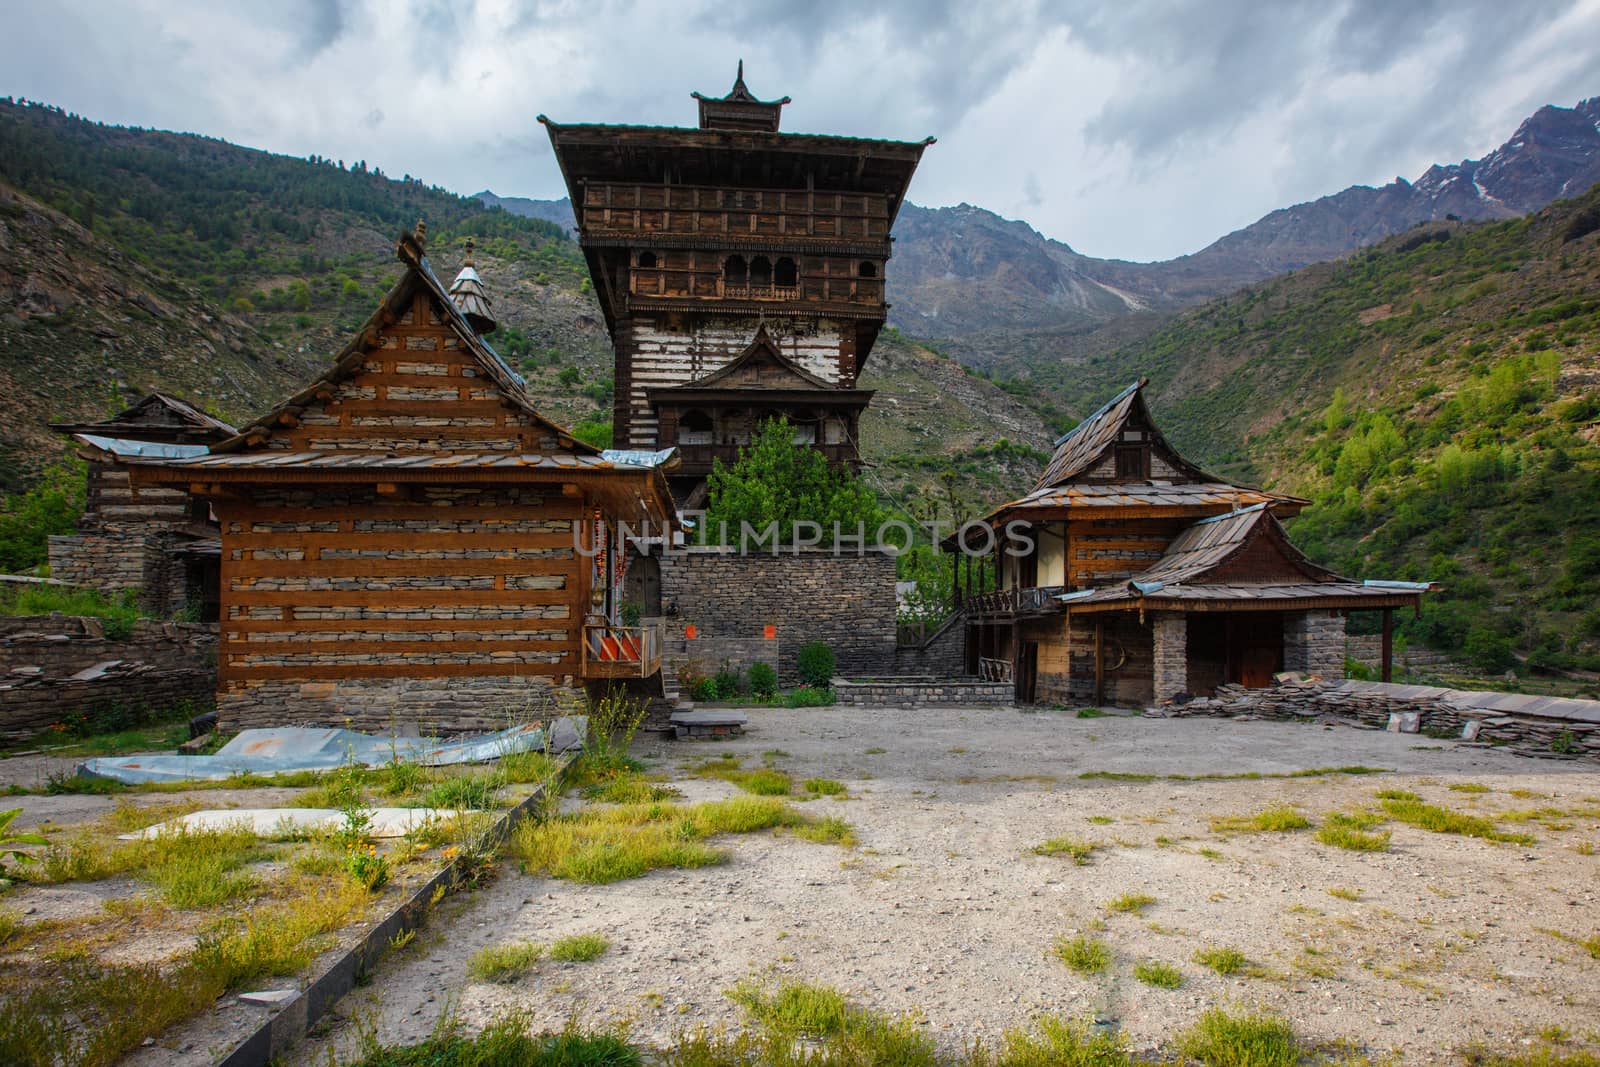 Sangla Fort - Hindu Temple. Sangla, Himachal Pradesh, India. Traditional architecture of Himachal Pradesh - layers of woods are alternated with broken stones